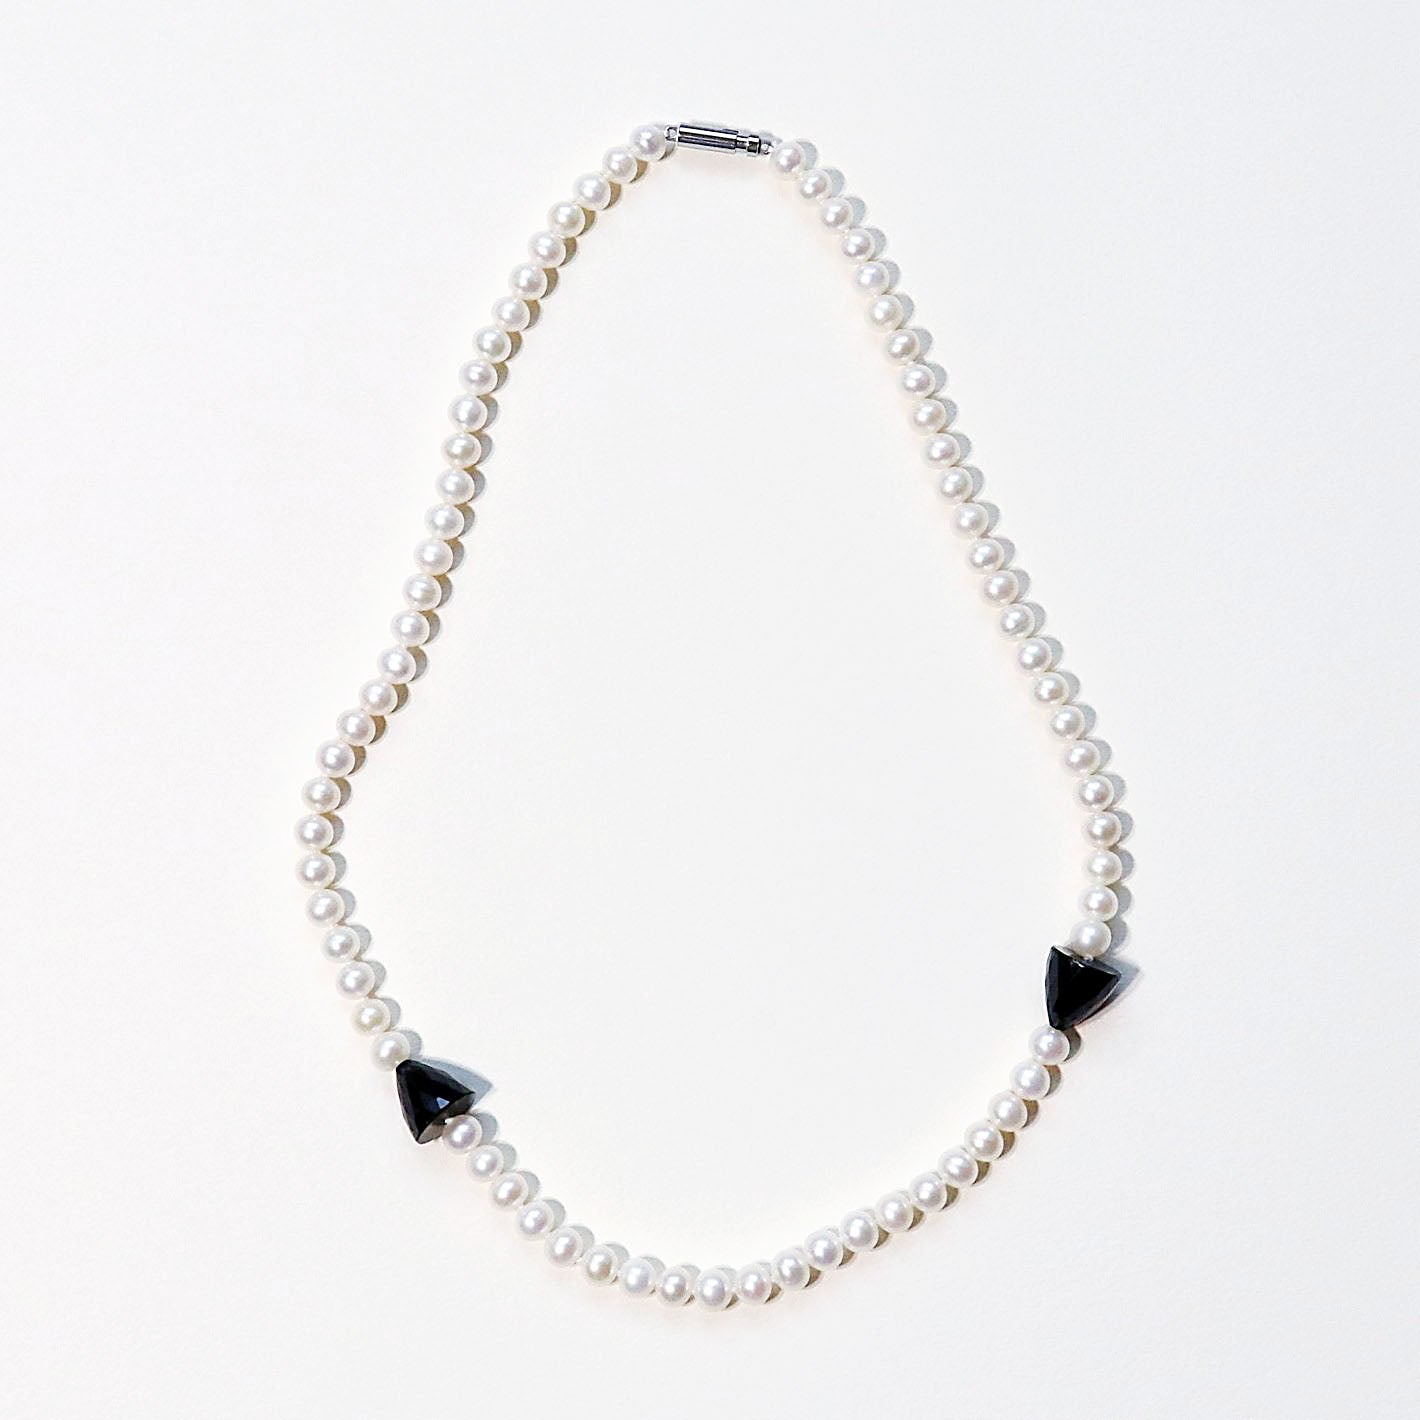 【no.29】パール&スピネルショートネックレス~knot pearl & black spinel necklace~ 